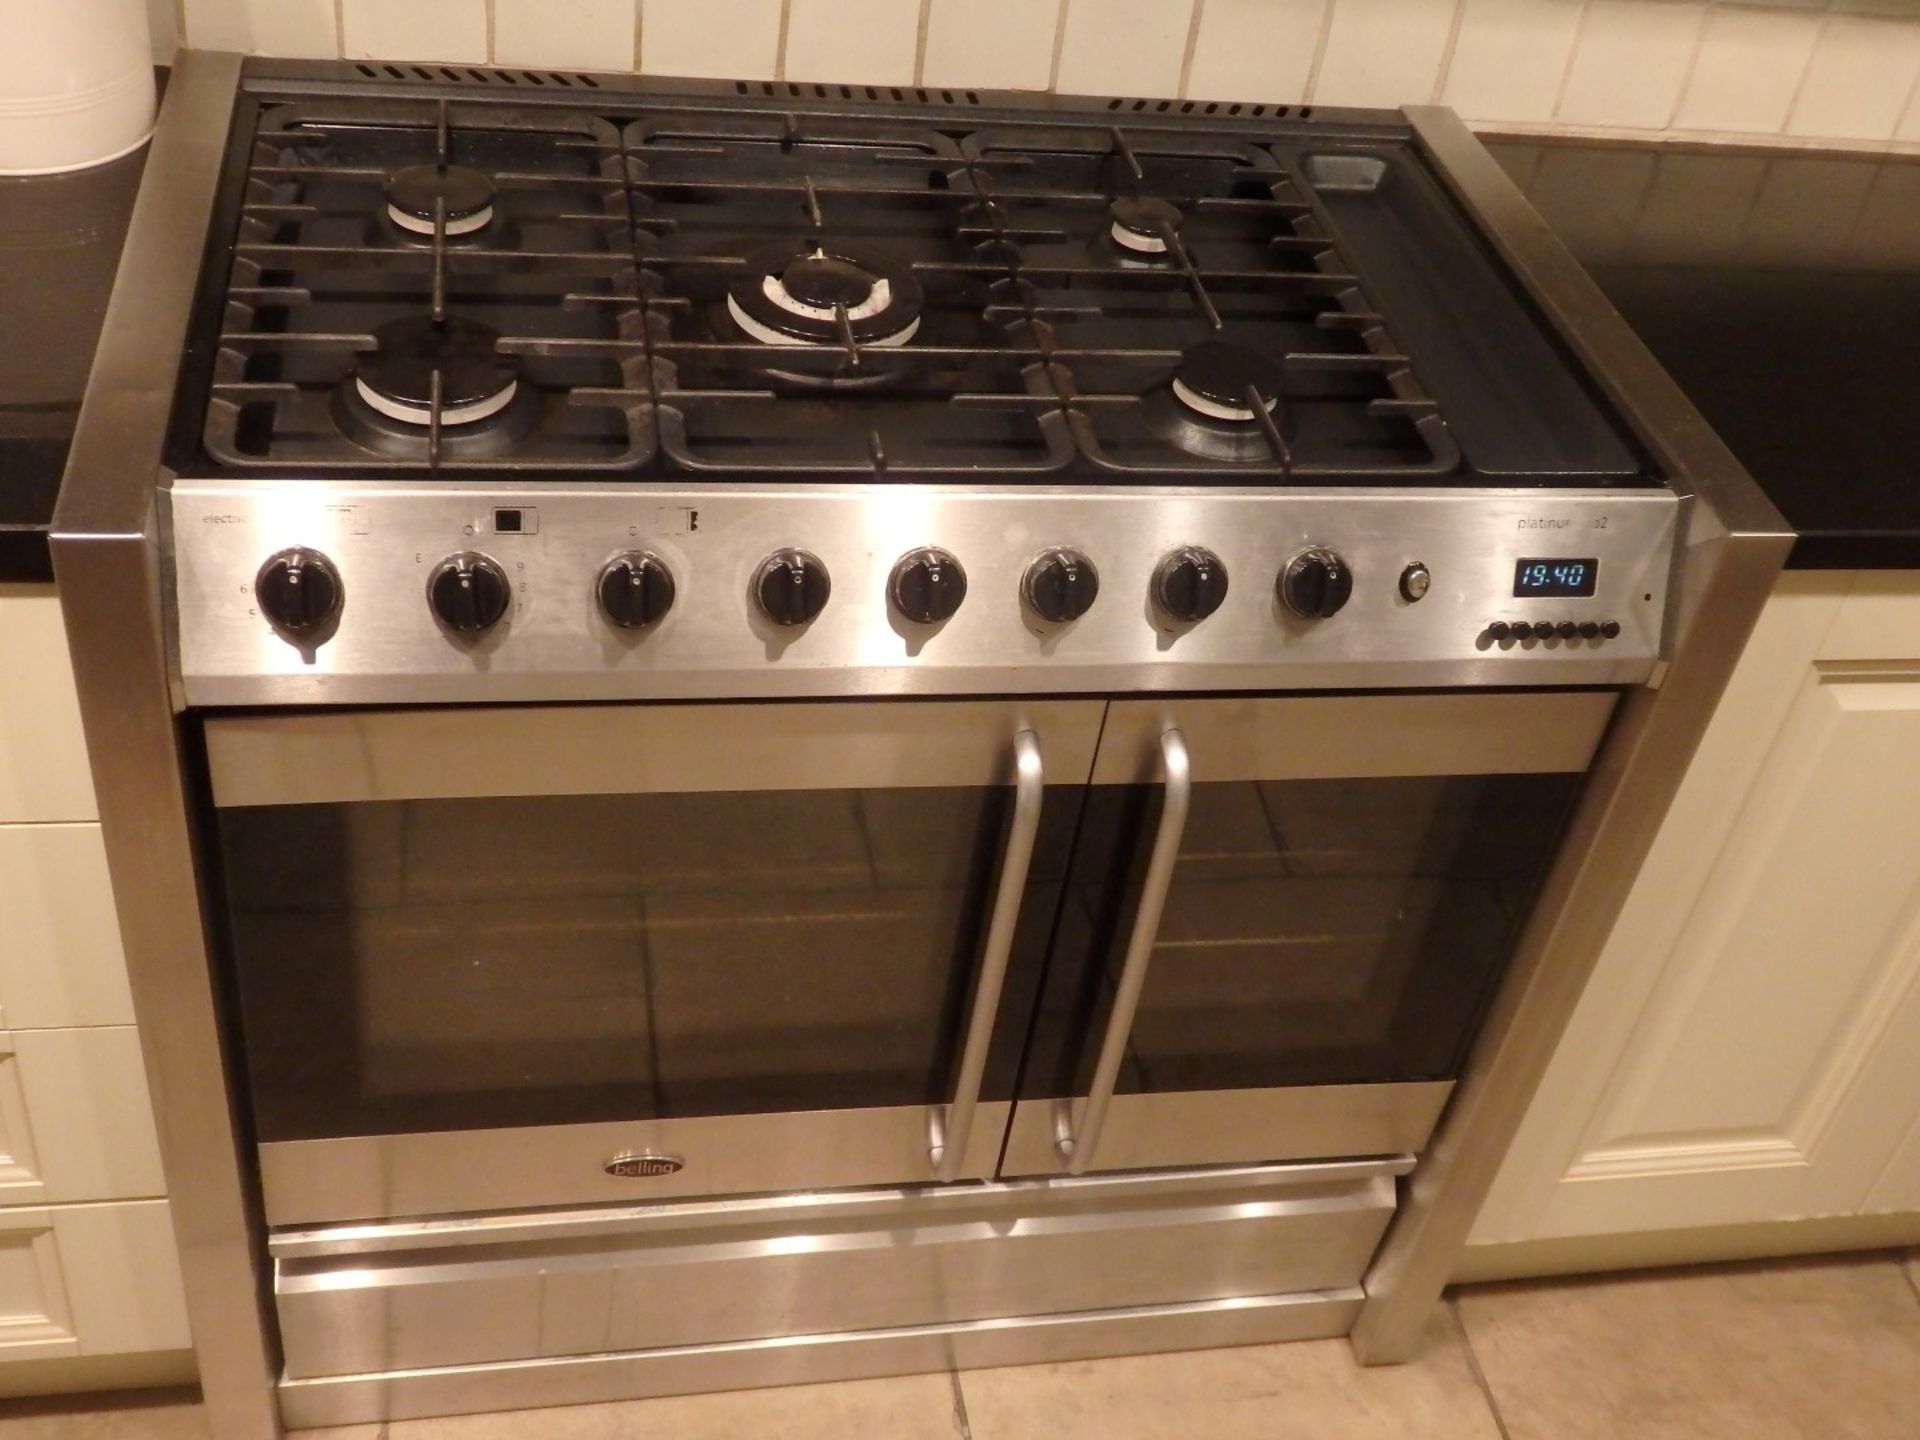 1 x Belling Platinum DB2 Range Cooker - Dual Fuel - 5 Ring Gas Burner and Electric Over - - Image 8 of 13